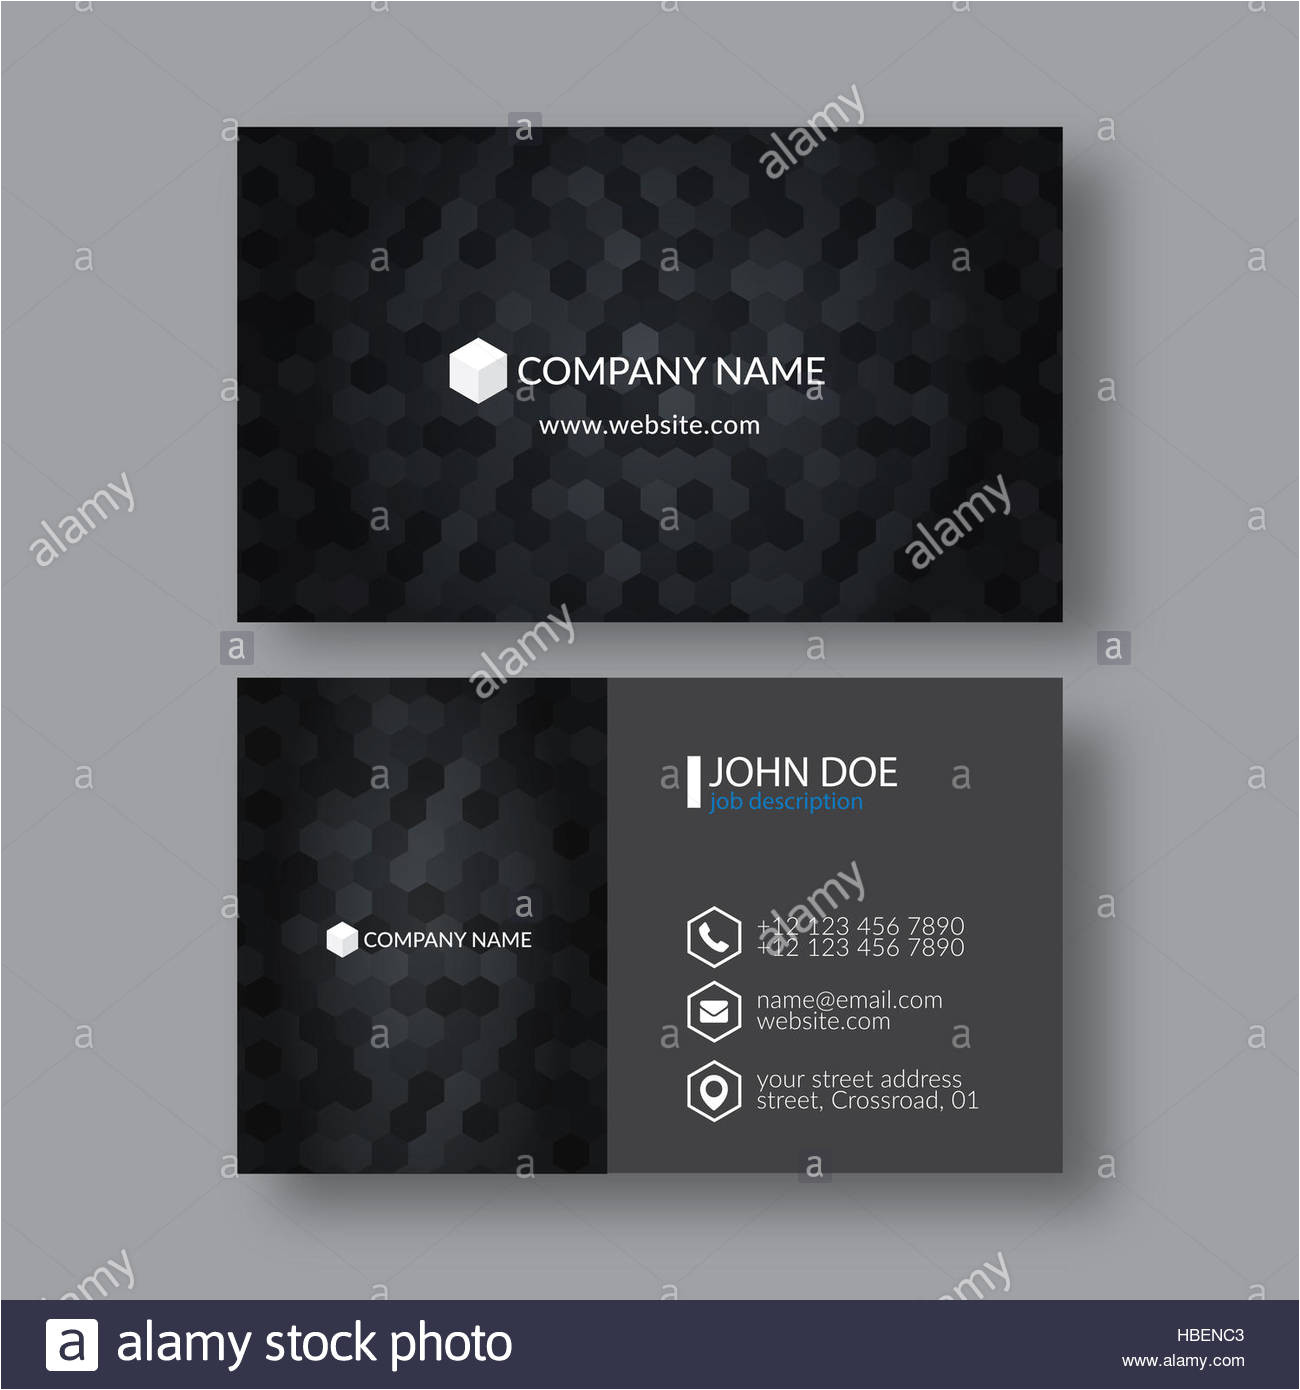 abstract elegant business card template hbenc3 jpg